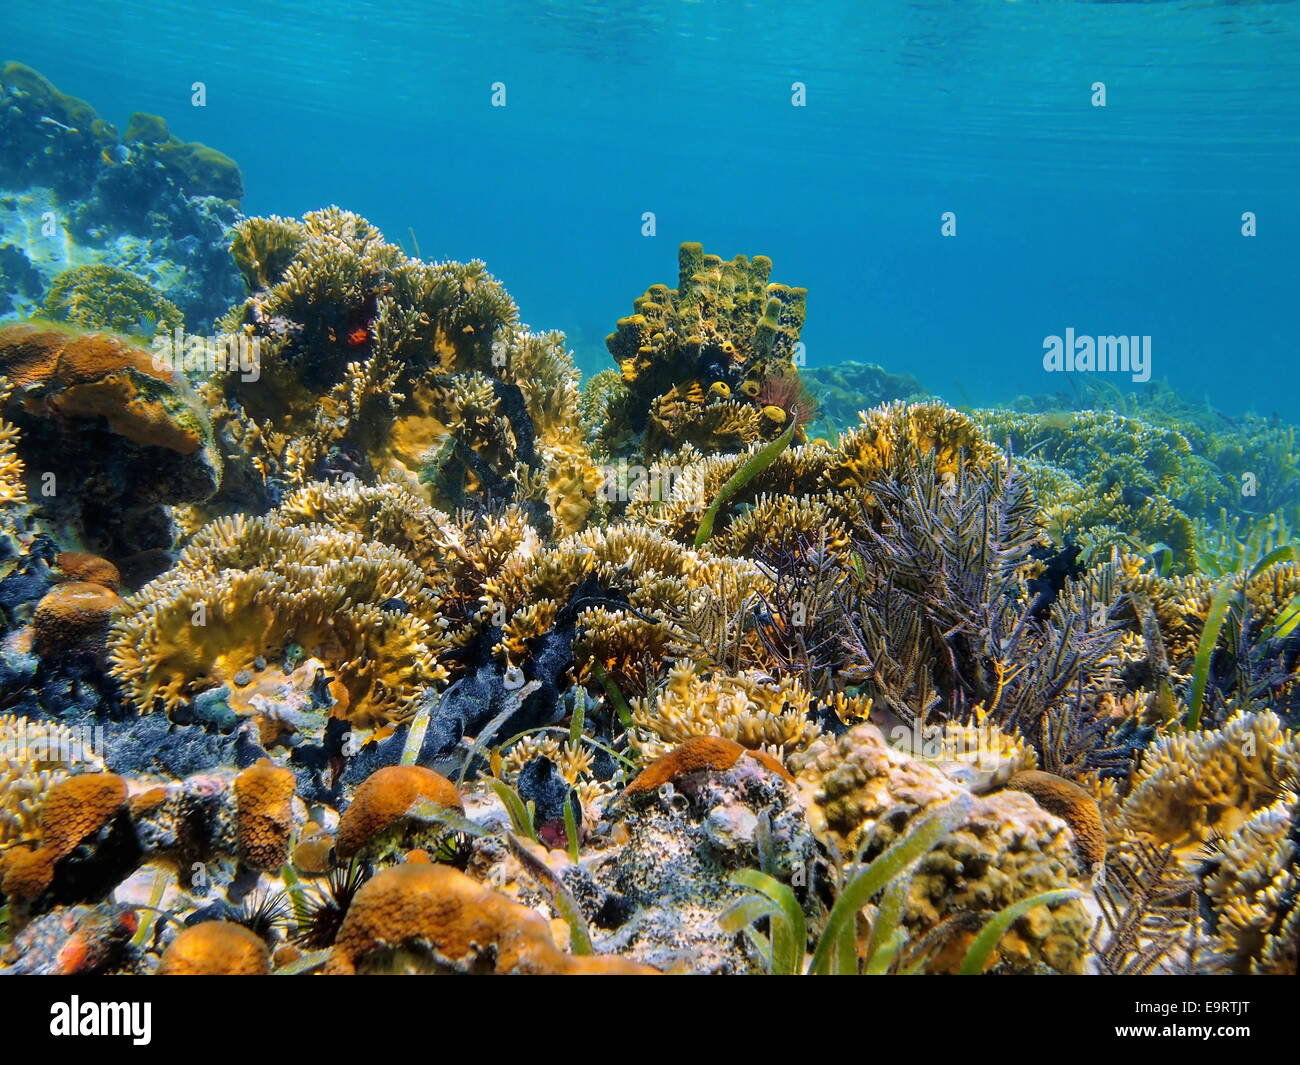 Underwater landscape in a shallow coral reef of the Caribbean sea Stock Photo